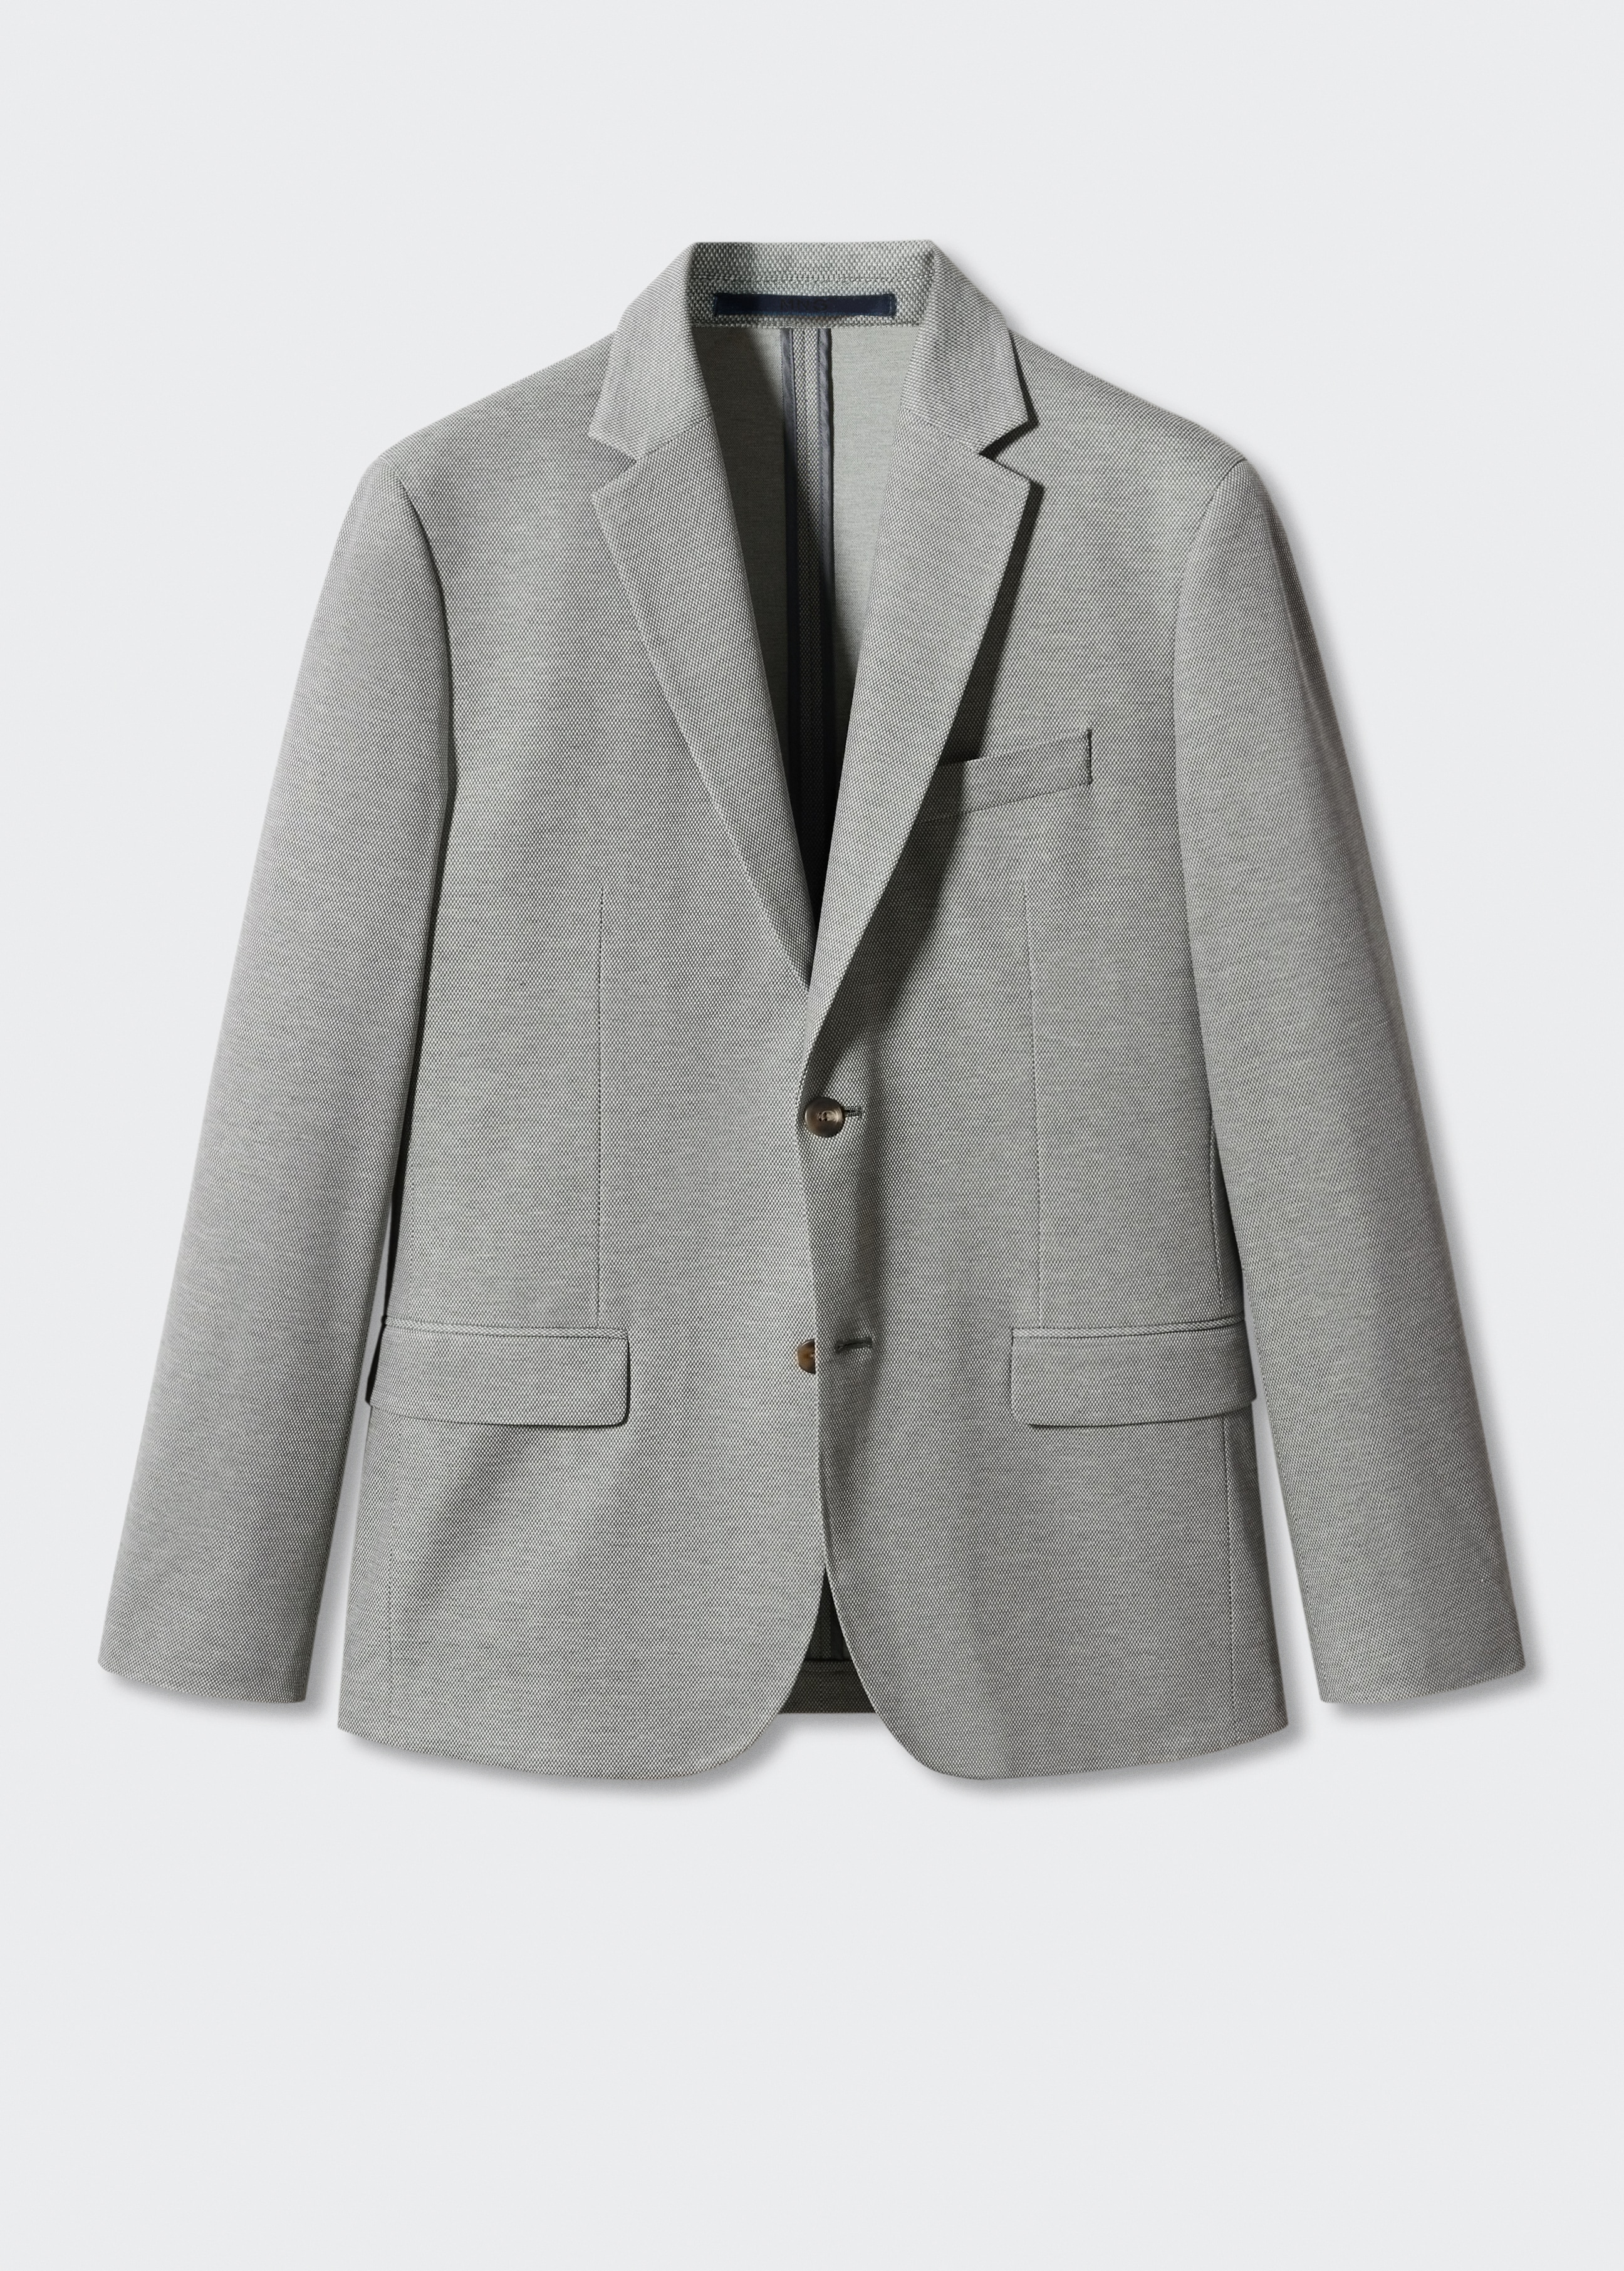 Slim fit microstructure blazer - Article without model